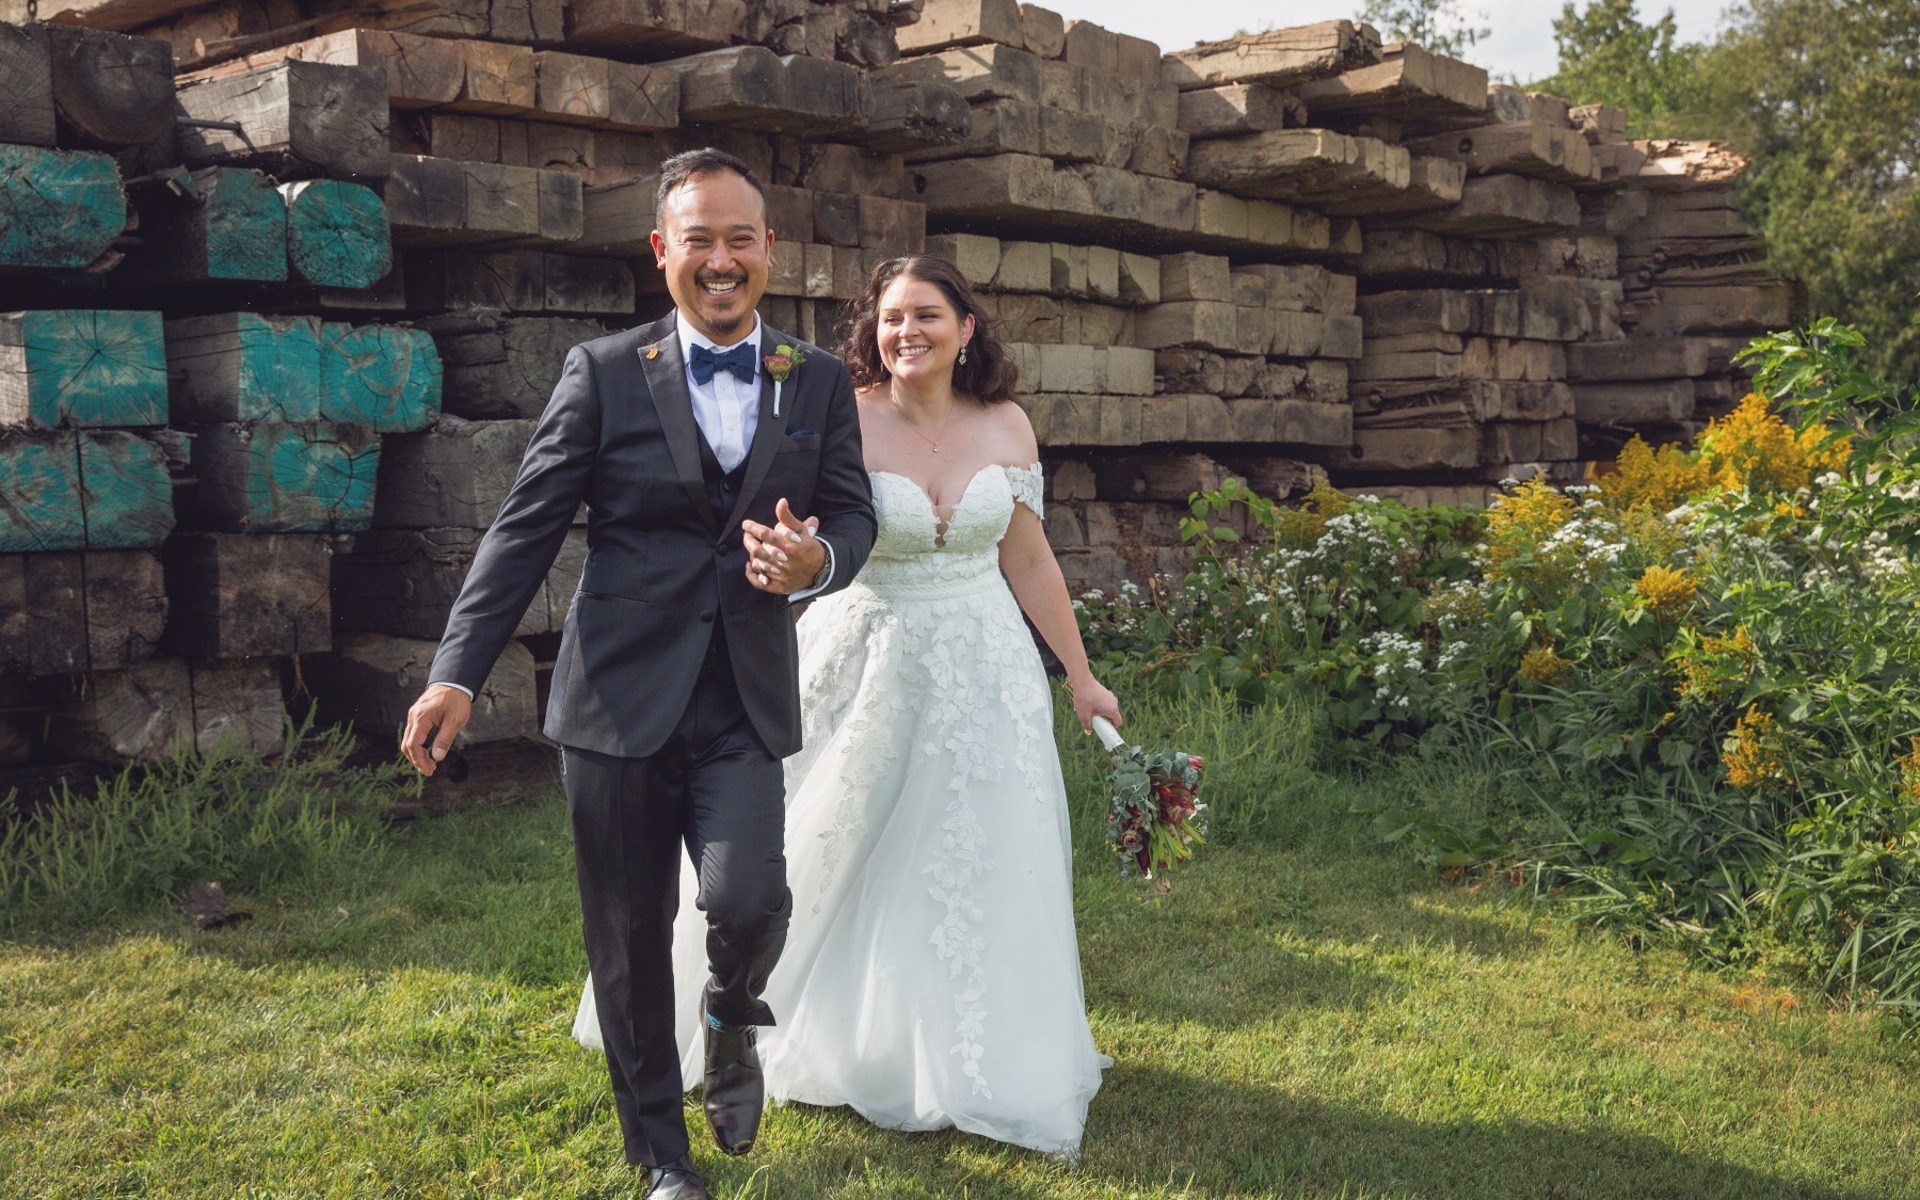 groom in black tux, bride in white laughing as they walk together